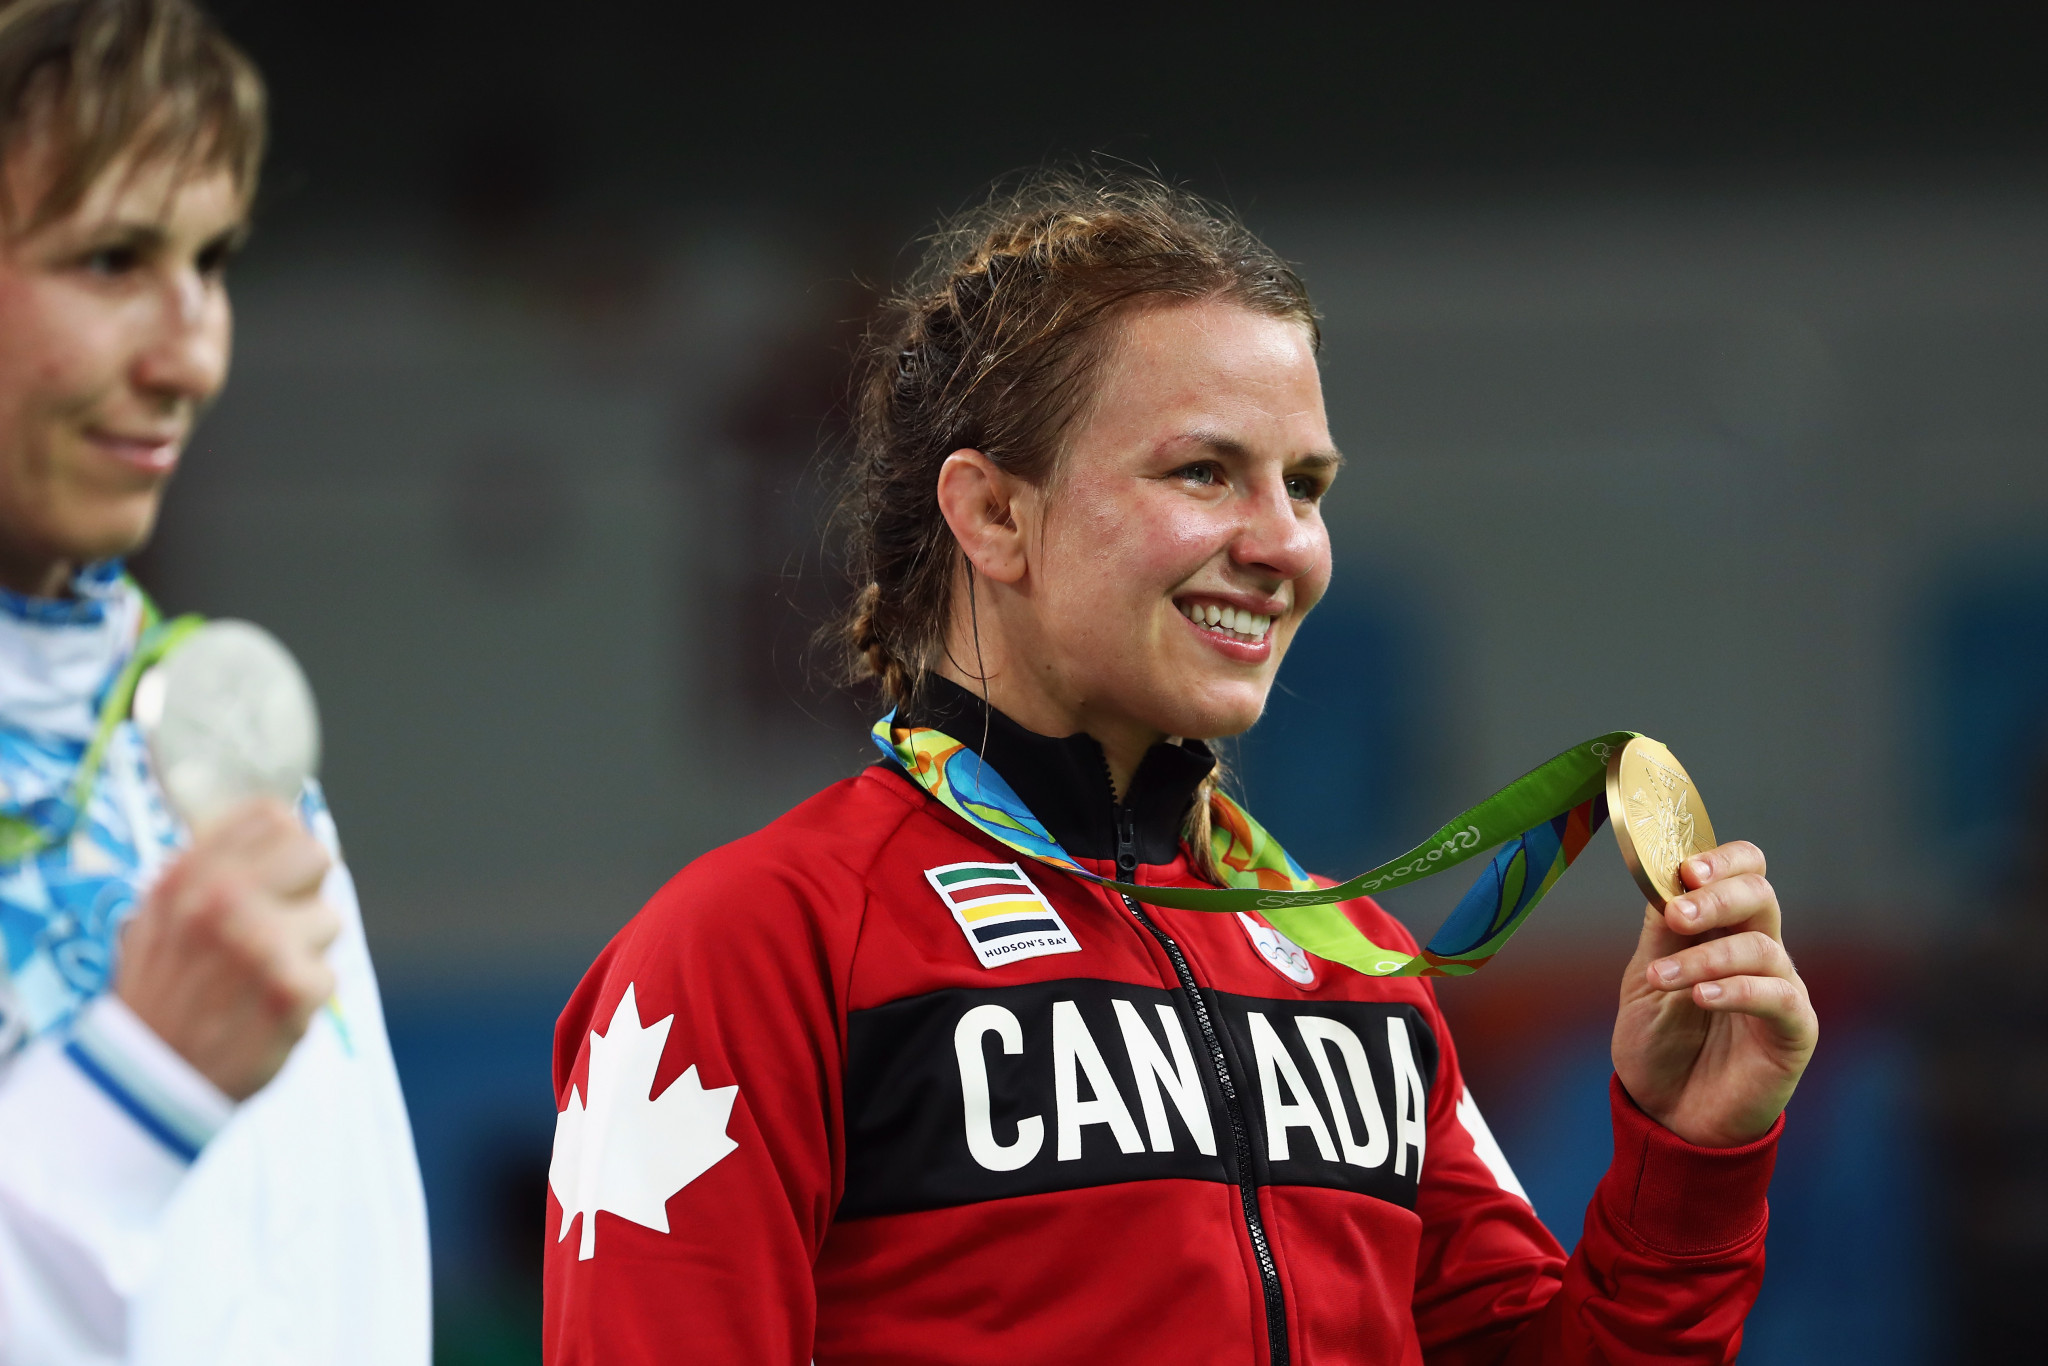 Olympic gold medallist Erica Wiebe is among the headline names on the Canadian team ©Getty Images